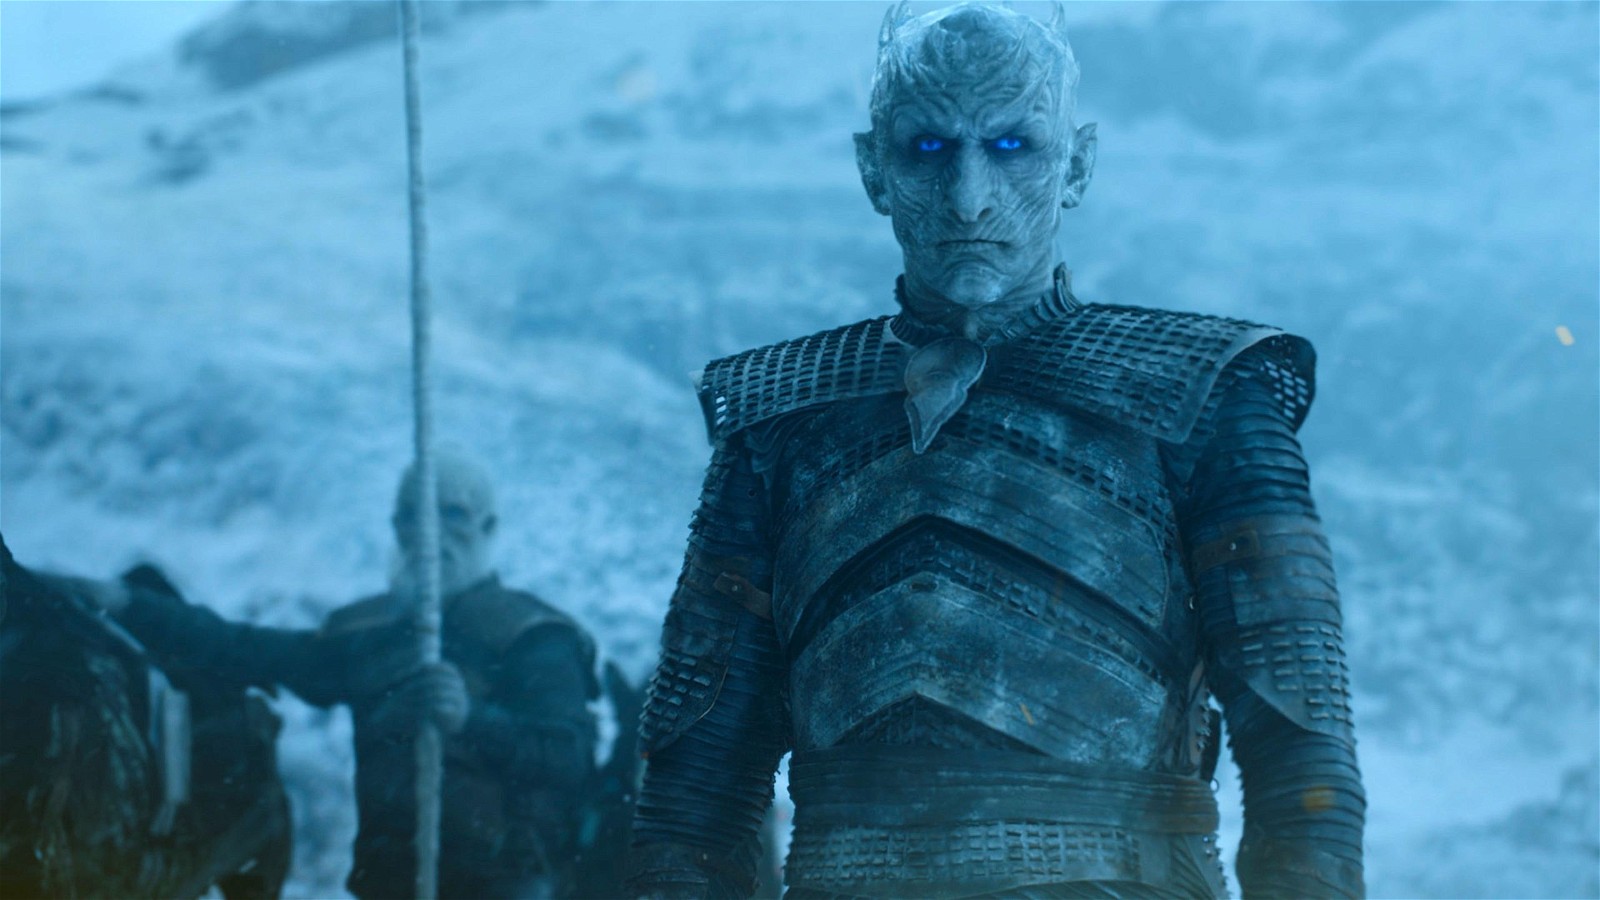 Bloodmoon, the Game of Thrones spinoff, was based on The Long Night storyline